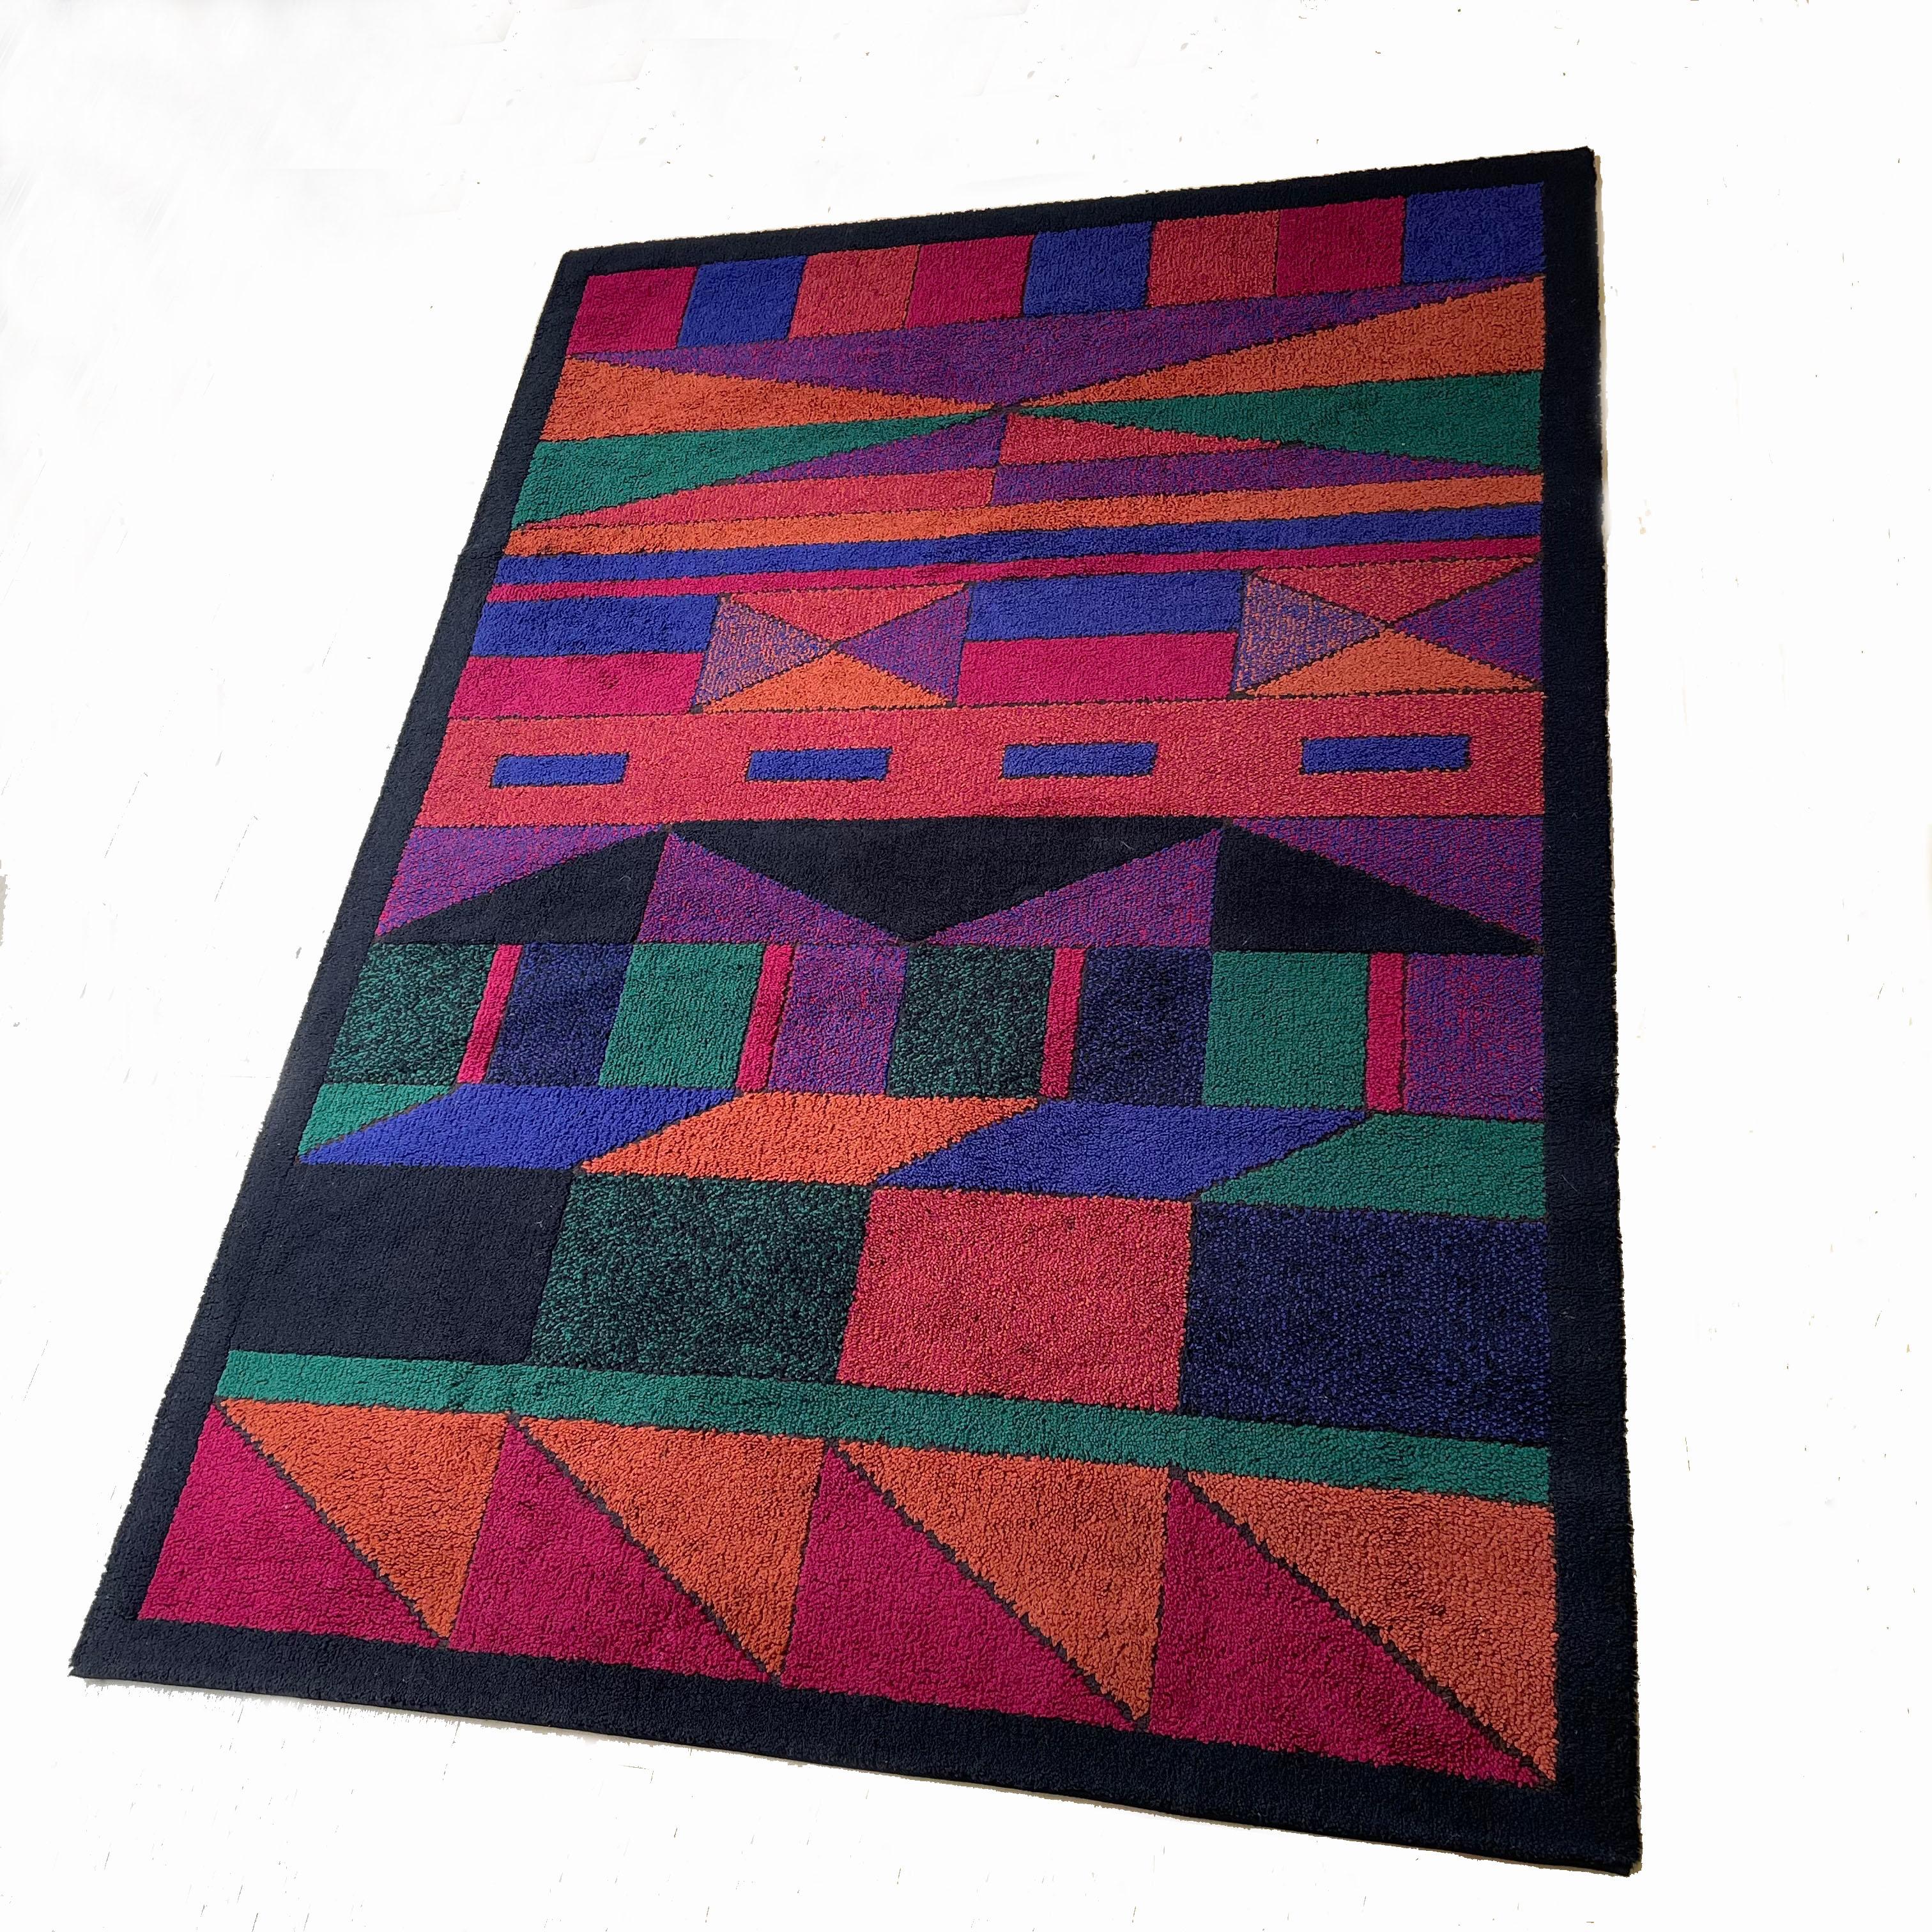 Extra large rug with abstract MEMPHIS style pattern.


Decade:

1980s


Origin:

Germany




Producer:

Atrium Tefzet, Germany



This rug is a great example of 1970s pop art interior. Made in high quality weaving technique.